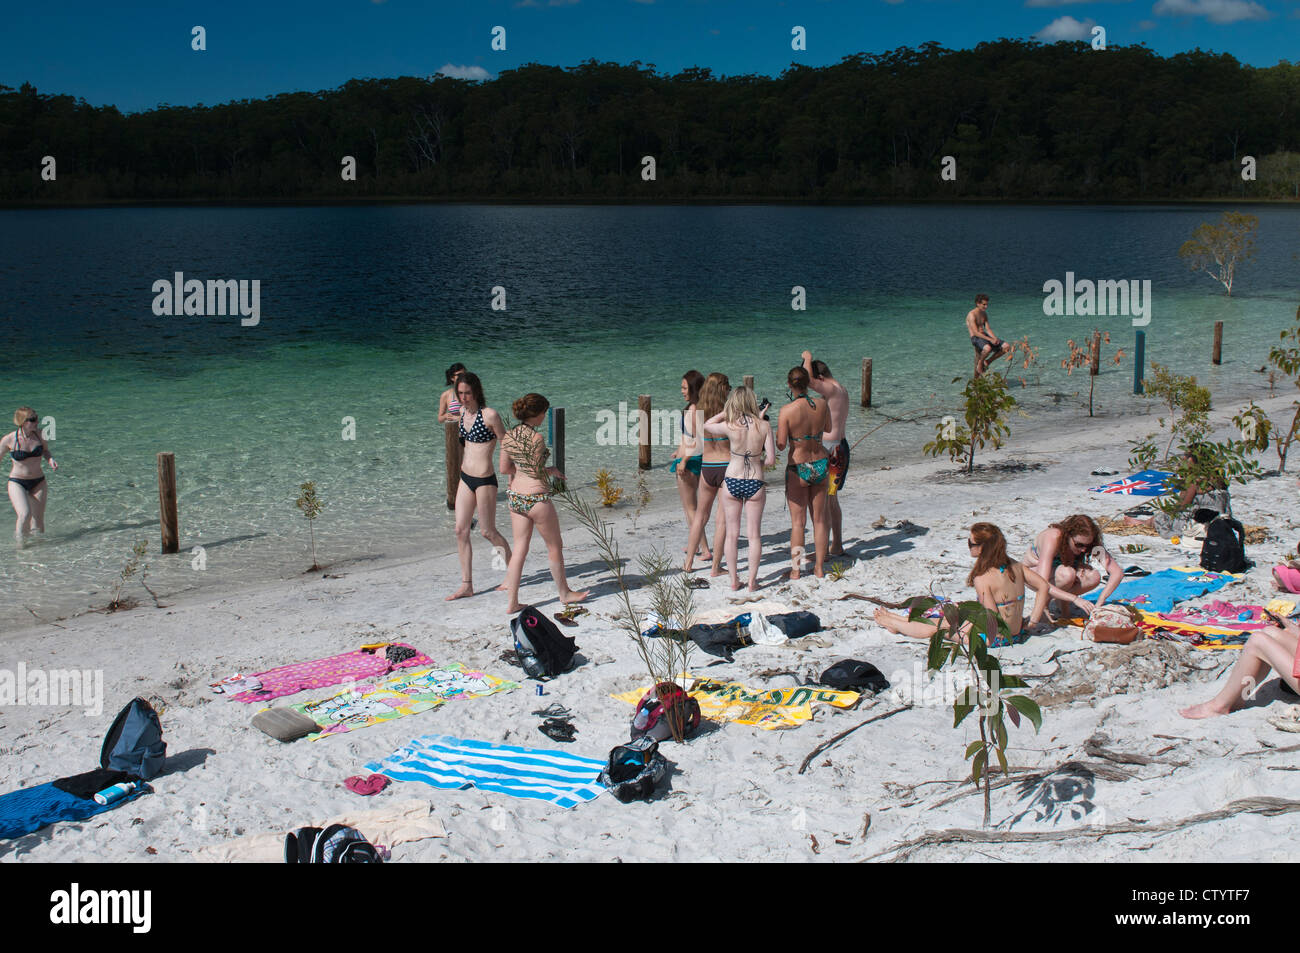 Young backpackers sunbathing and swimming at Lake Mckenzie. Stock Photo